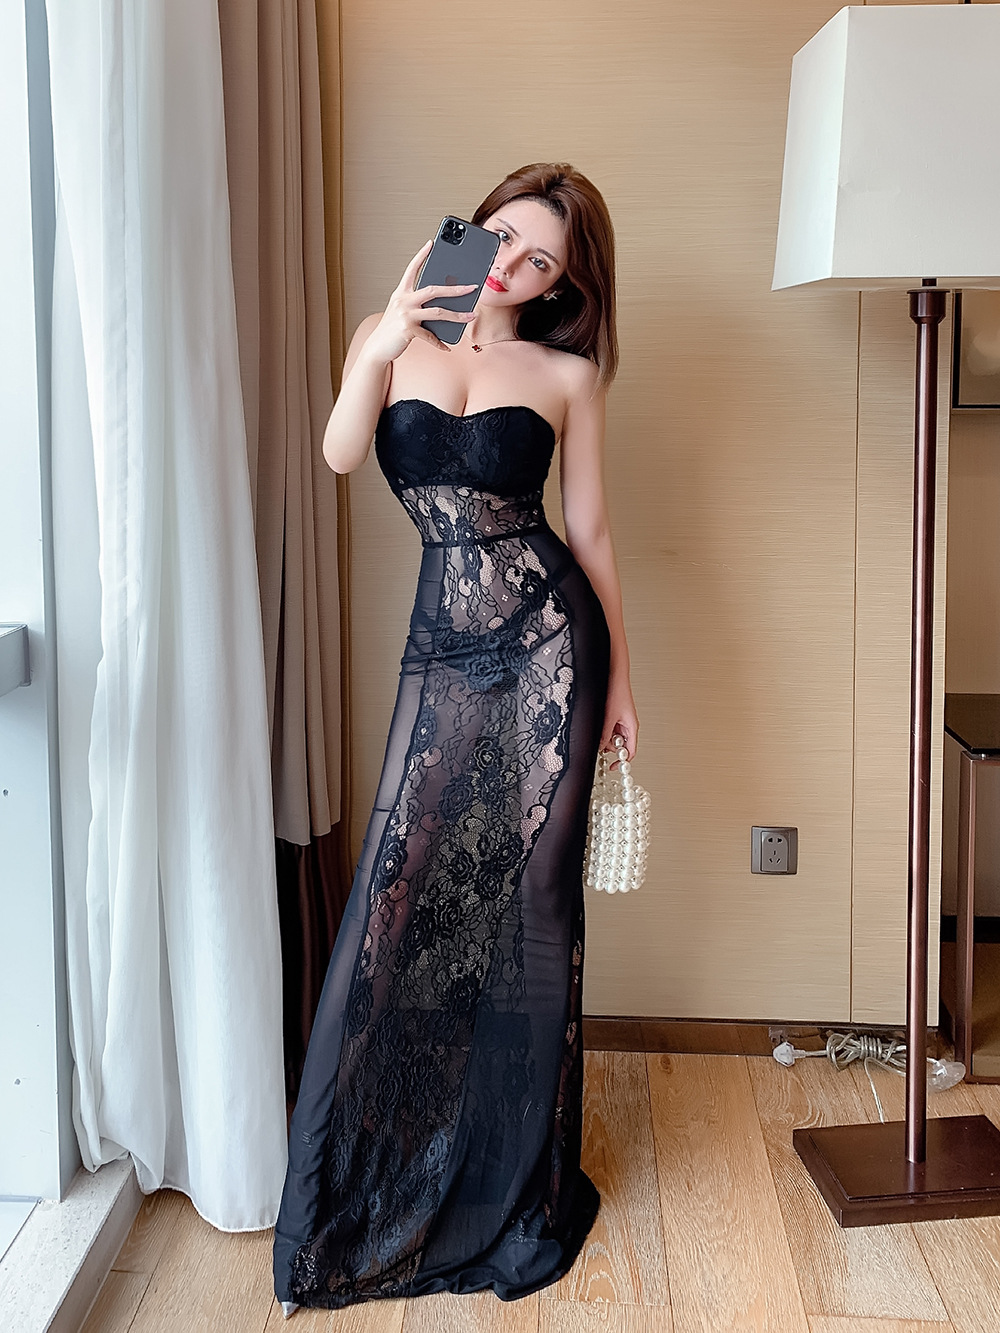 Sexy night show dress perspective lace formal dress